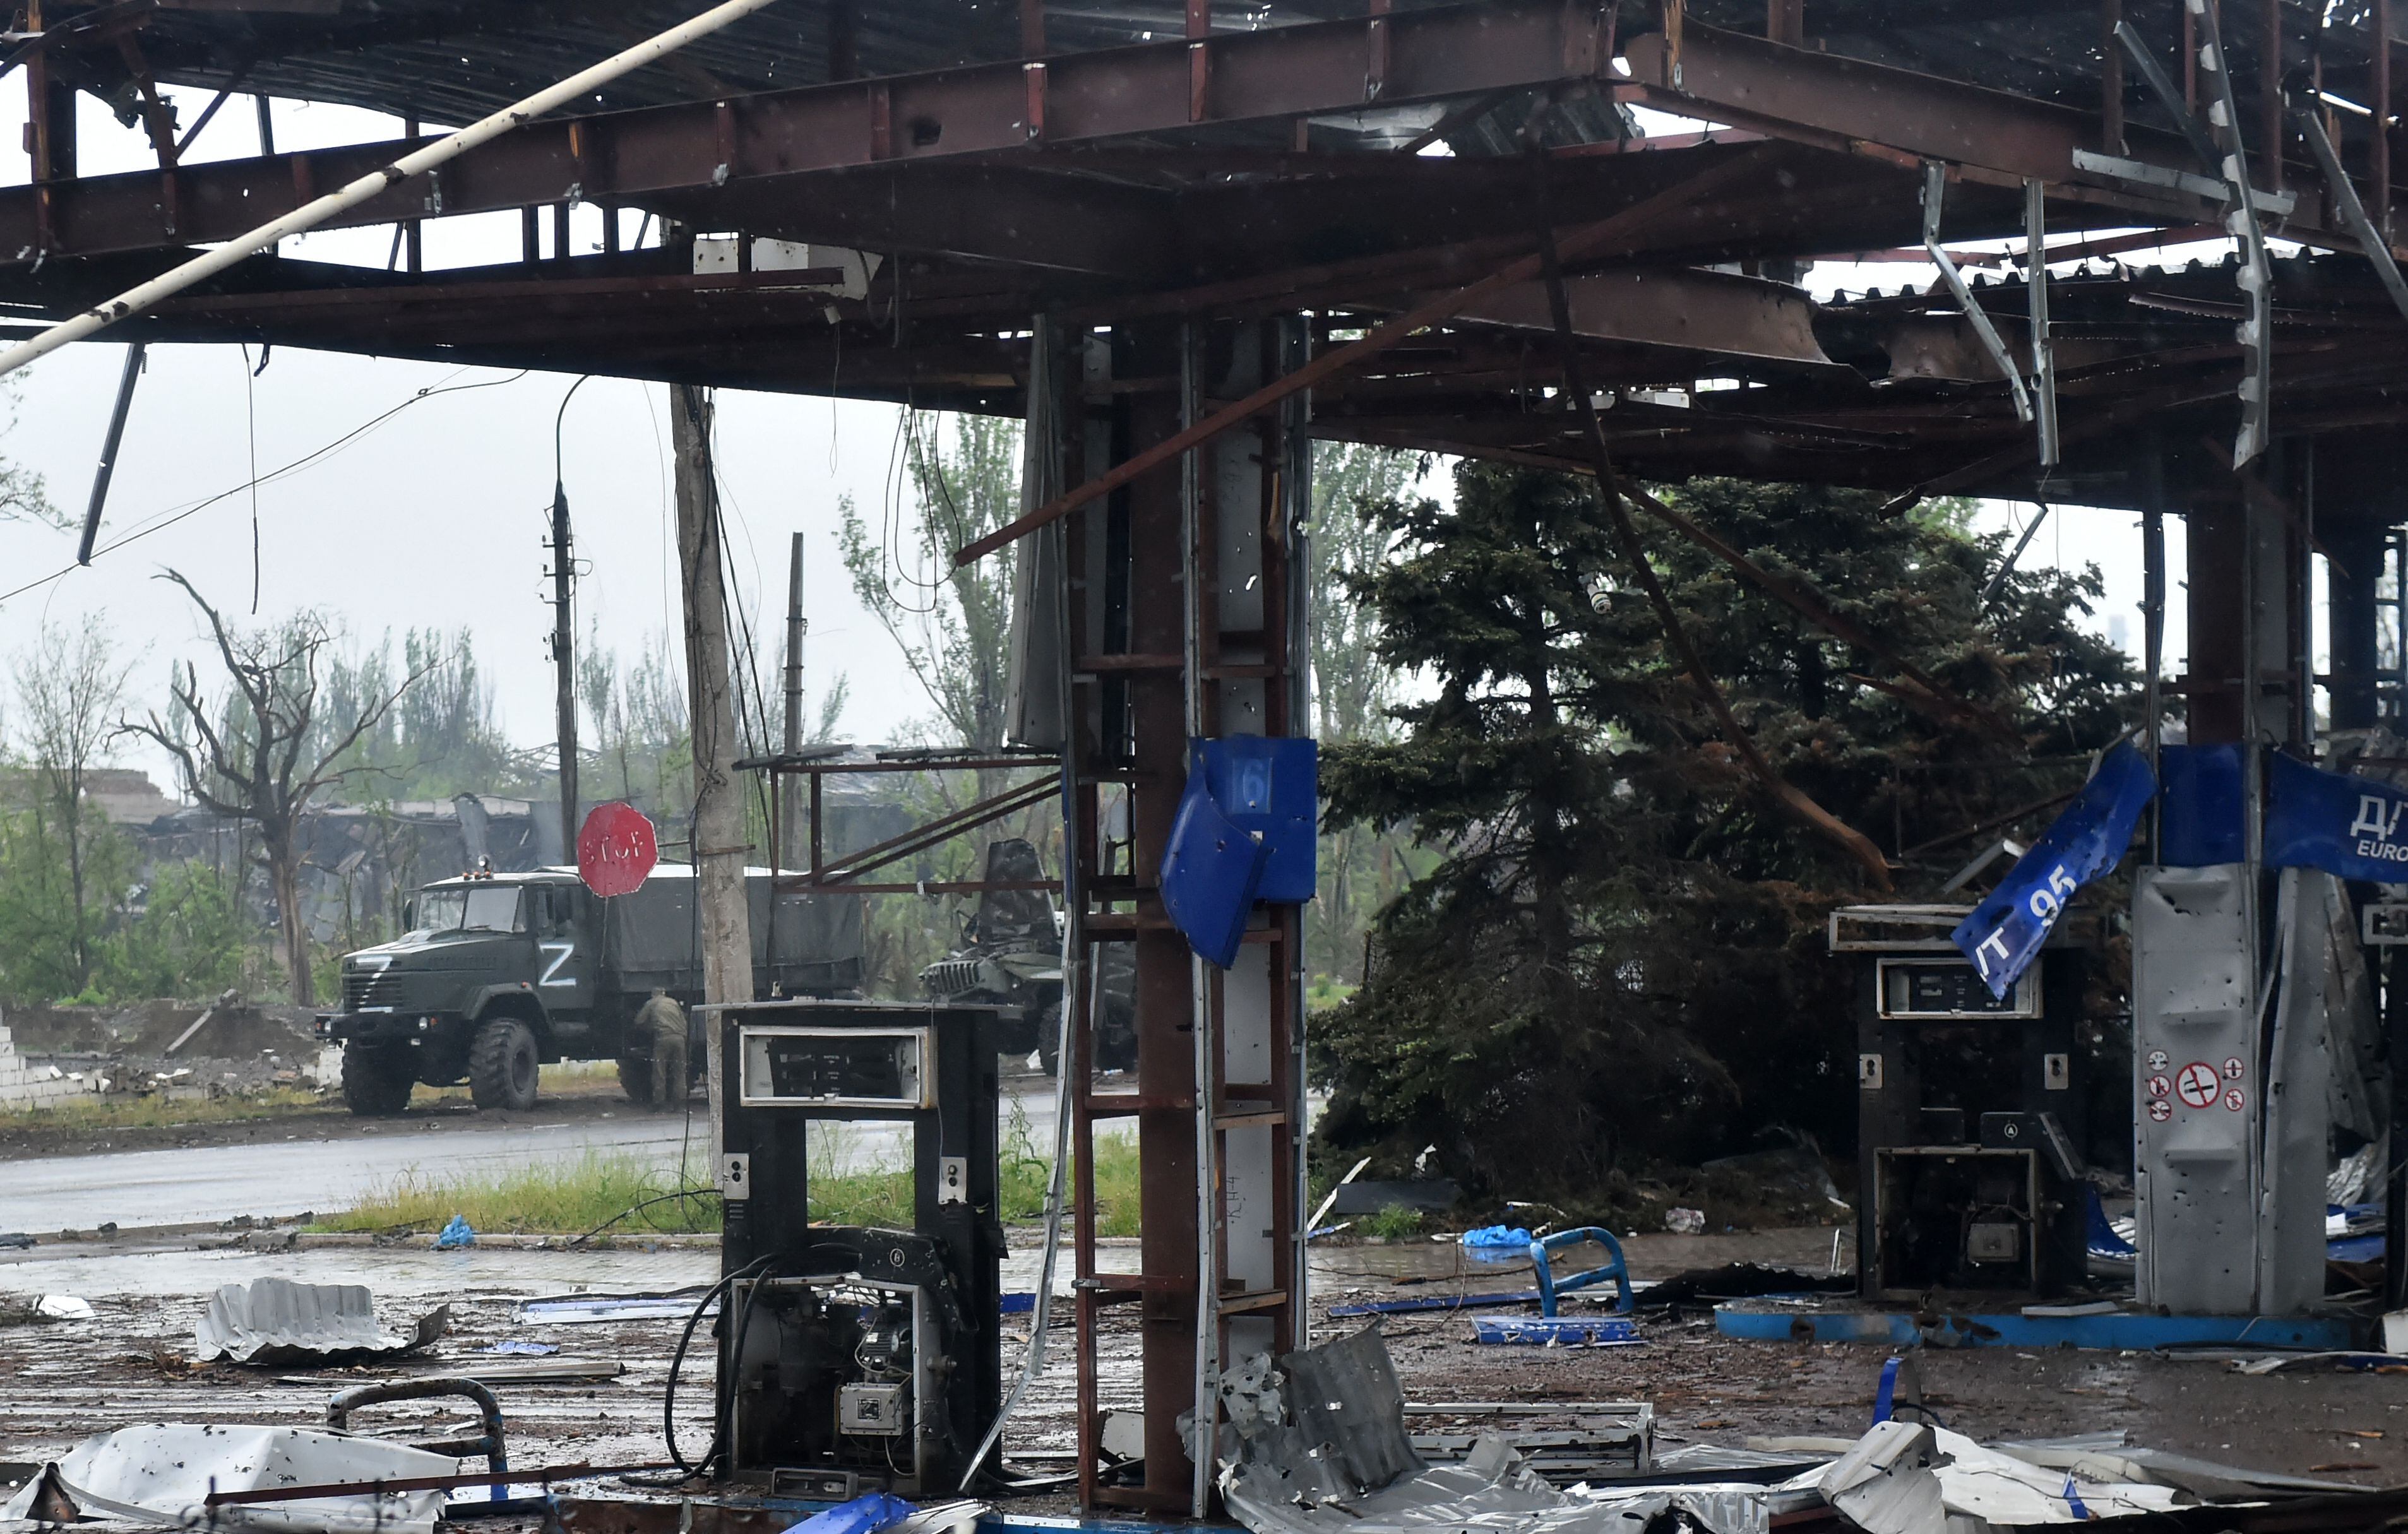 A Russian military truck painted with the letter Z is seen behind a destroyed gas station in the port city of Mariupol, Ukraine amid ongoing Russian military action in Ukraine.